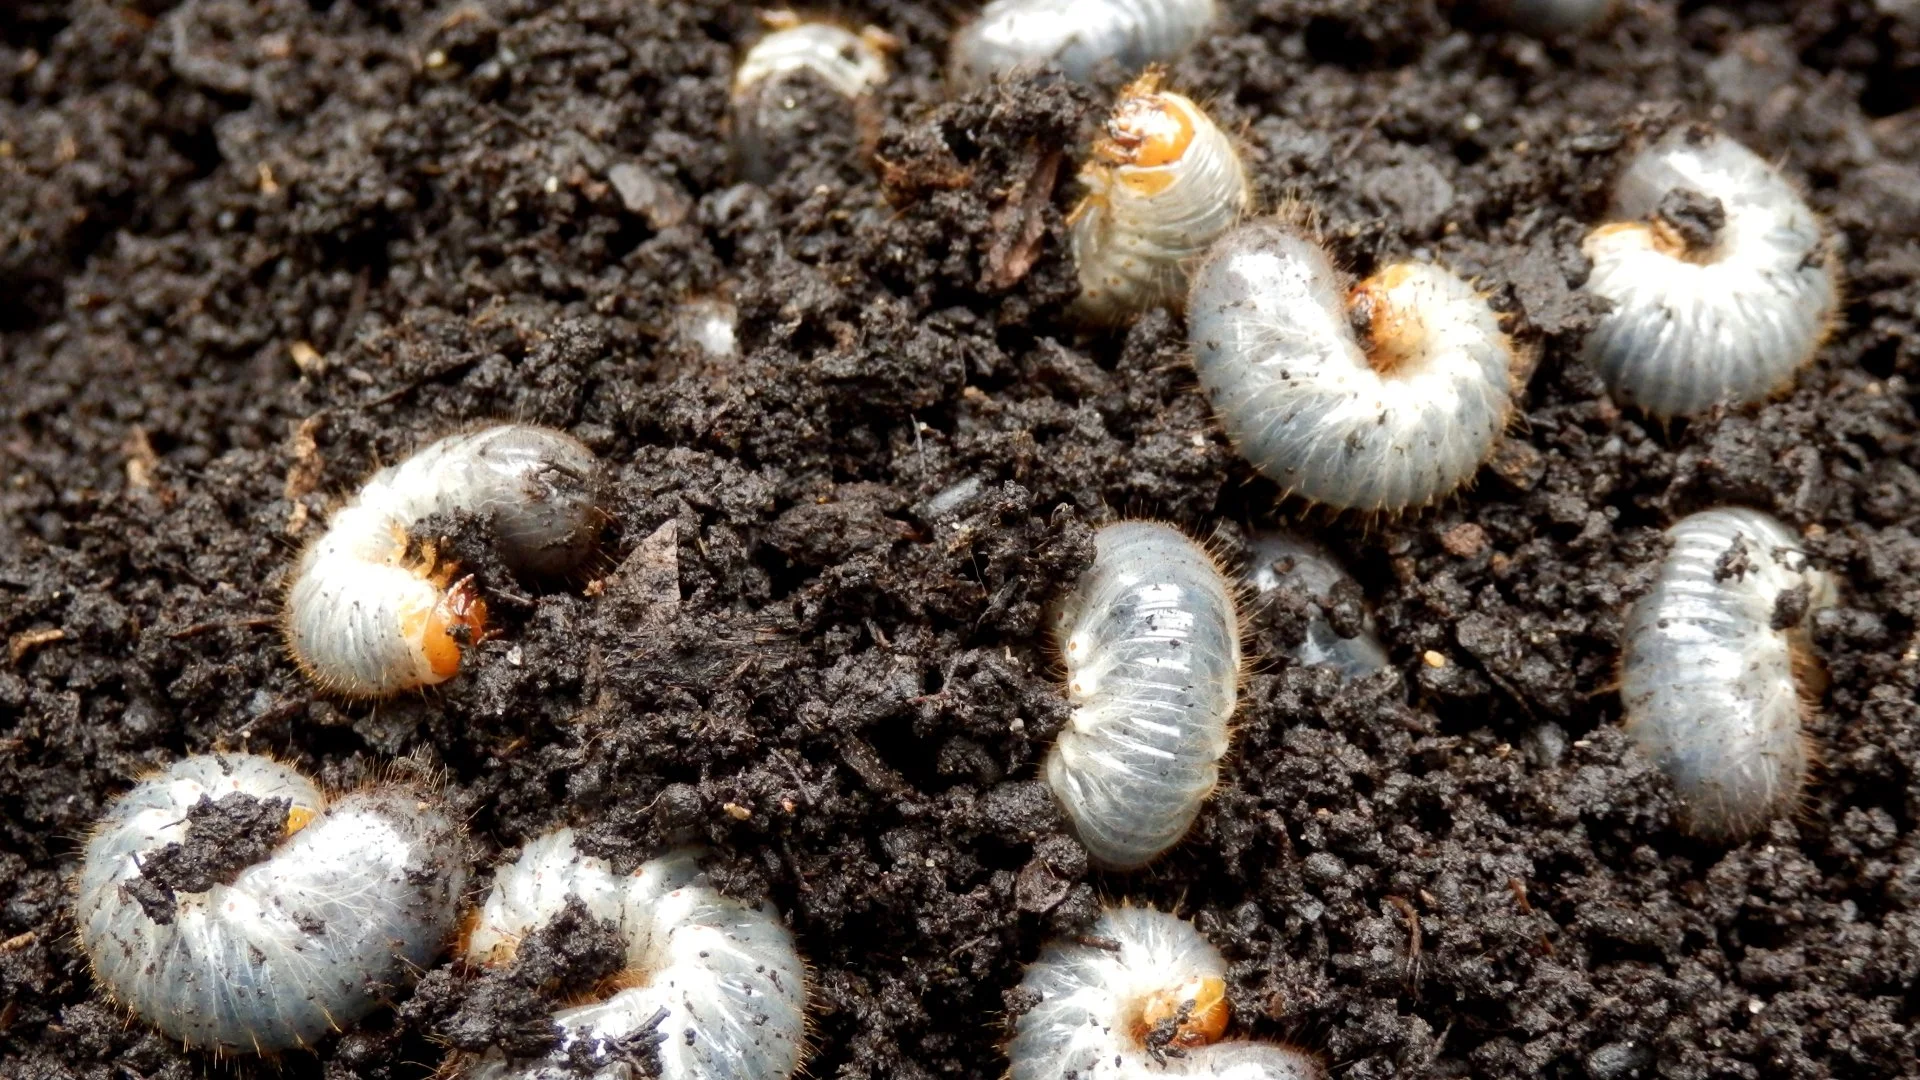 Grubs vs Chinch Bugs - How to Tell the Difference Between These Lawn Insects